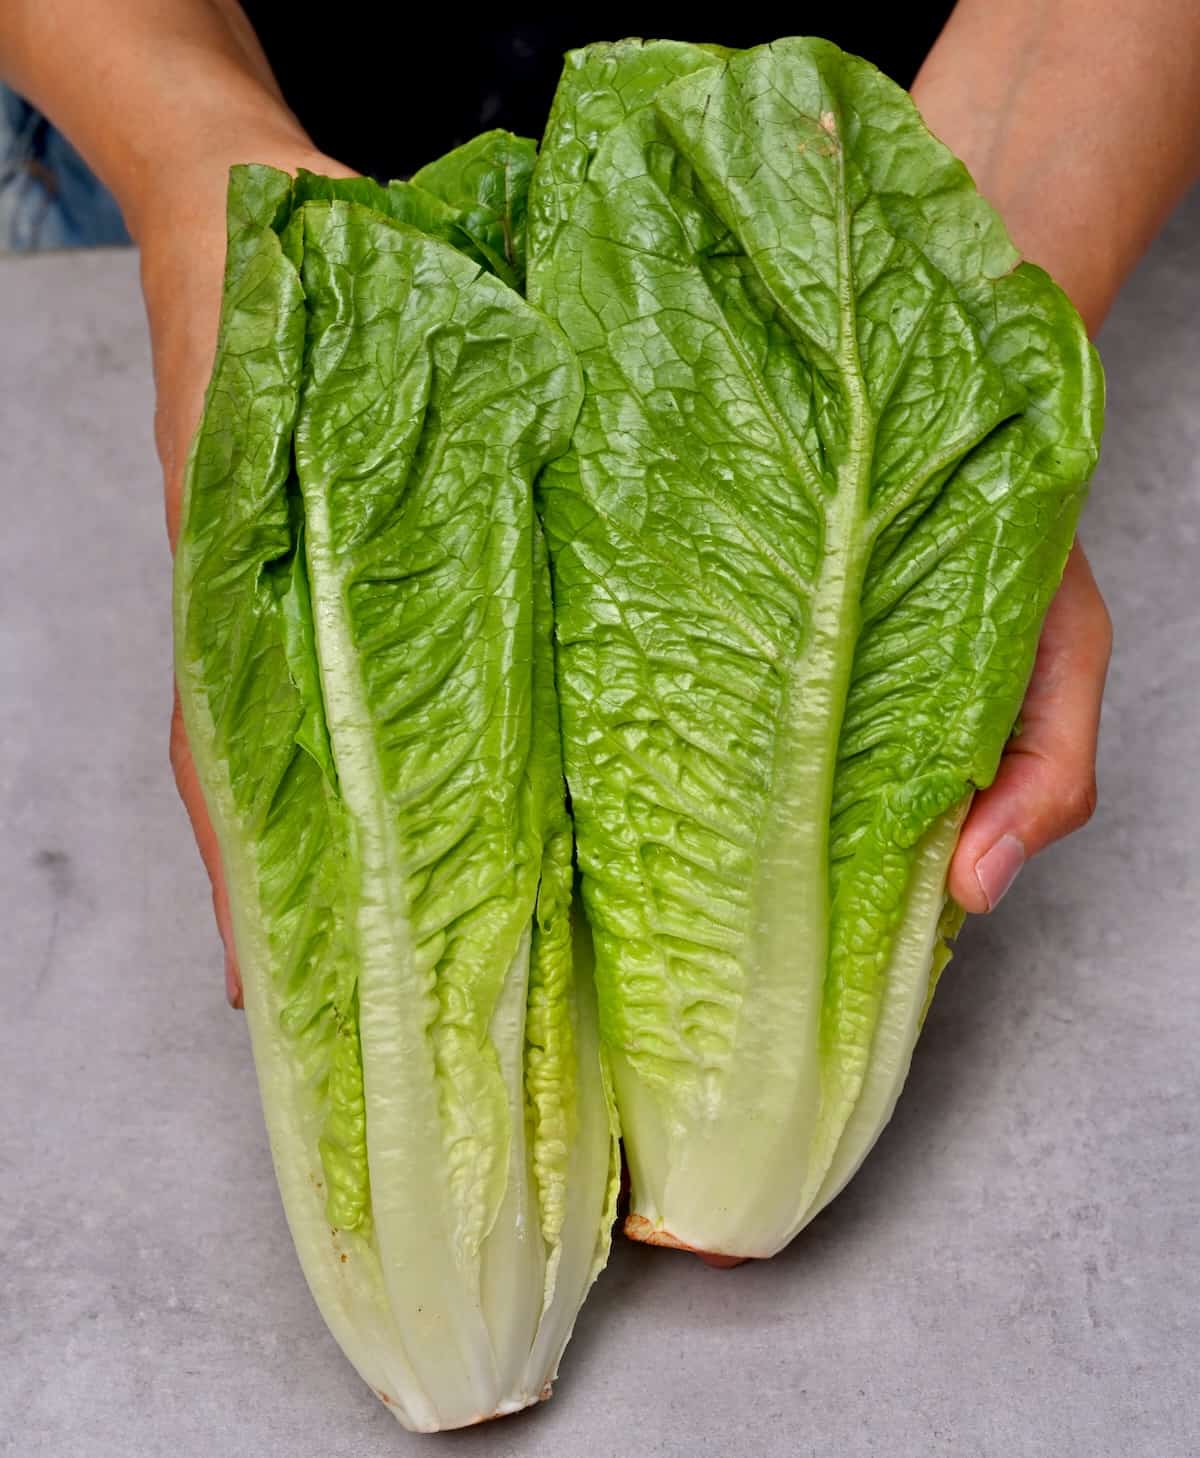 Two heads of Romaine lettuce